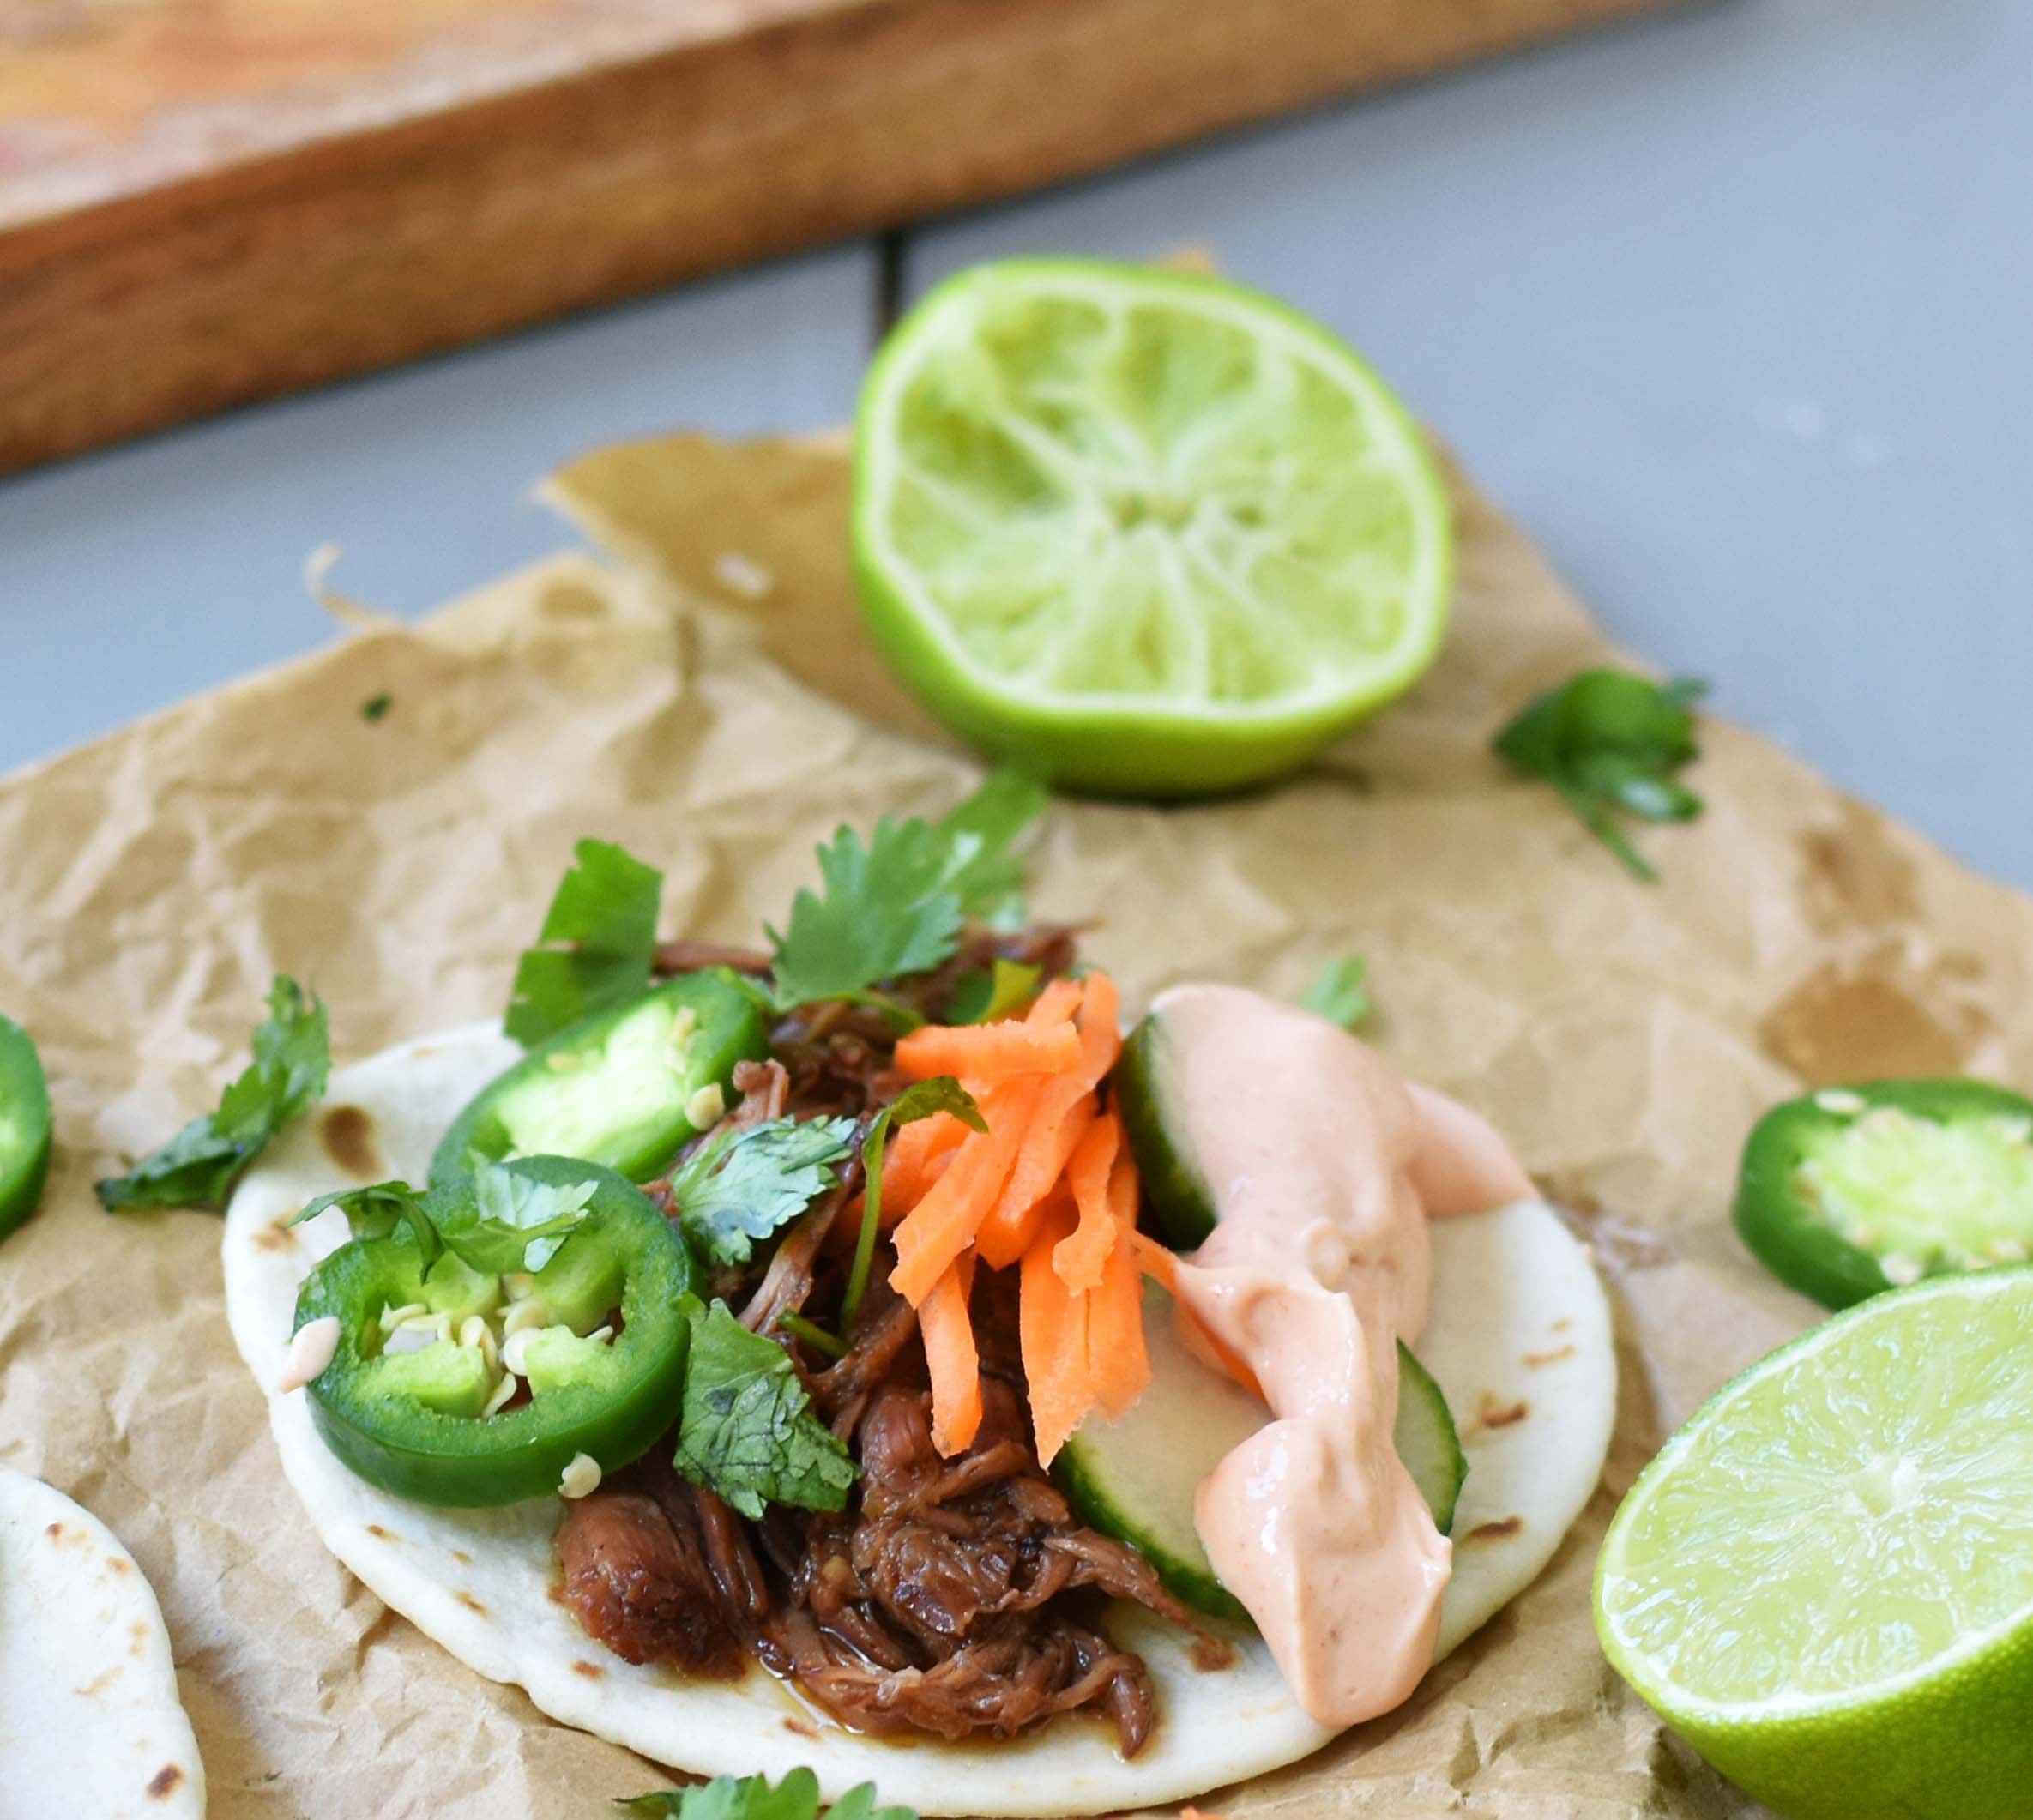 Slow Cooker Instant Pot Korean Beef Tacos. Slowly simmered korean beef with asian spices and topped with crunchy slaw. An easy weeknight dinner that is a huge hit with the family! www.modernhoney.com